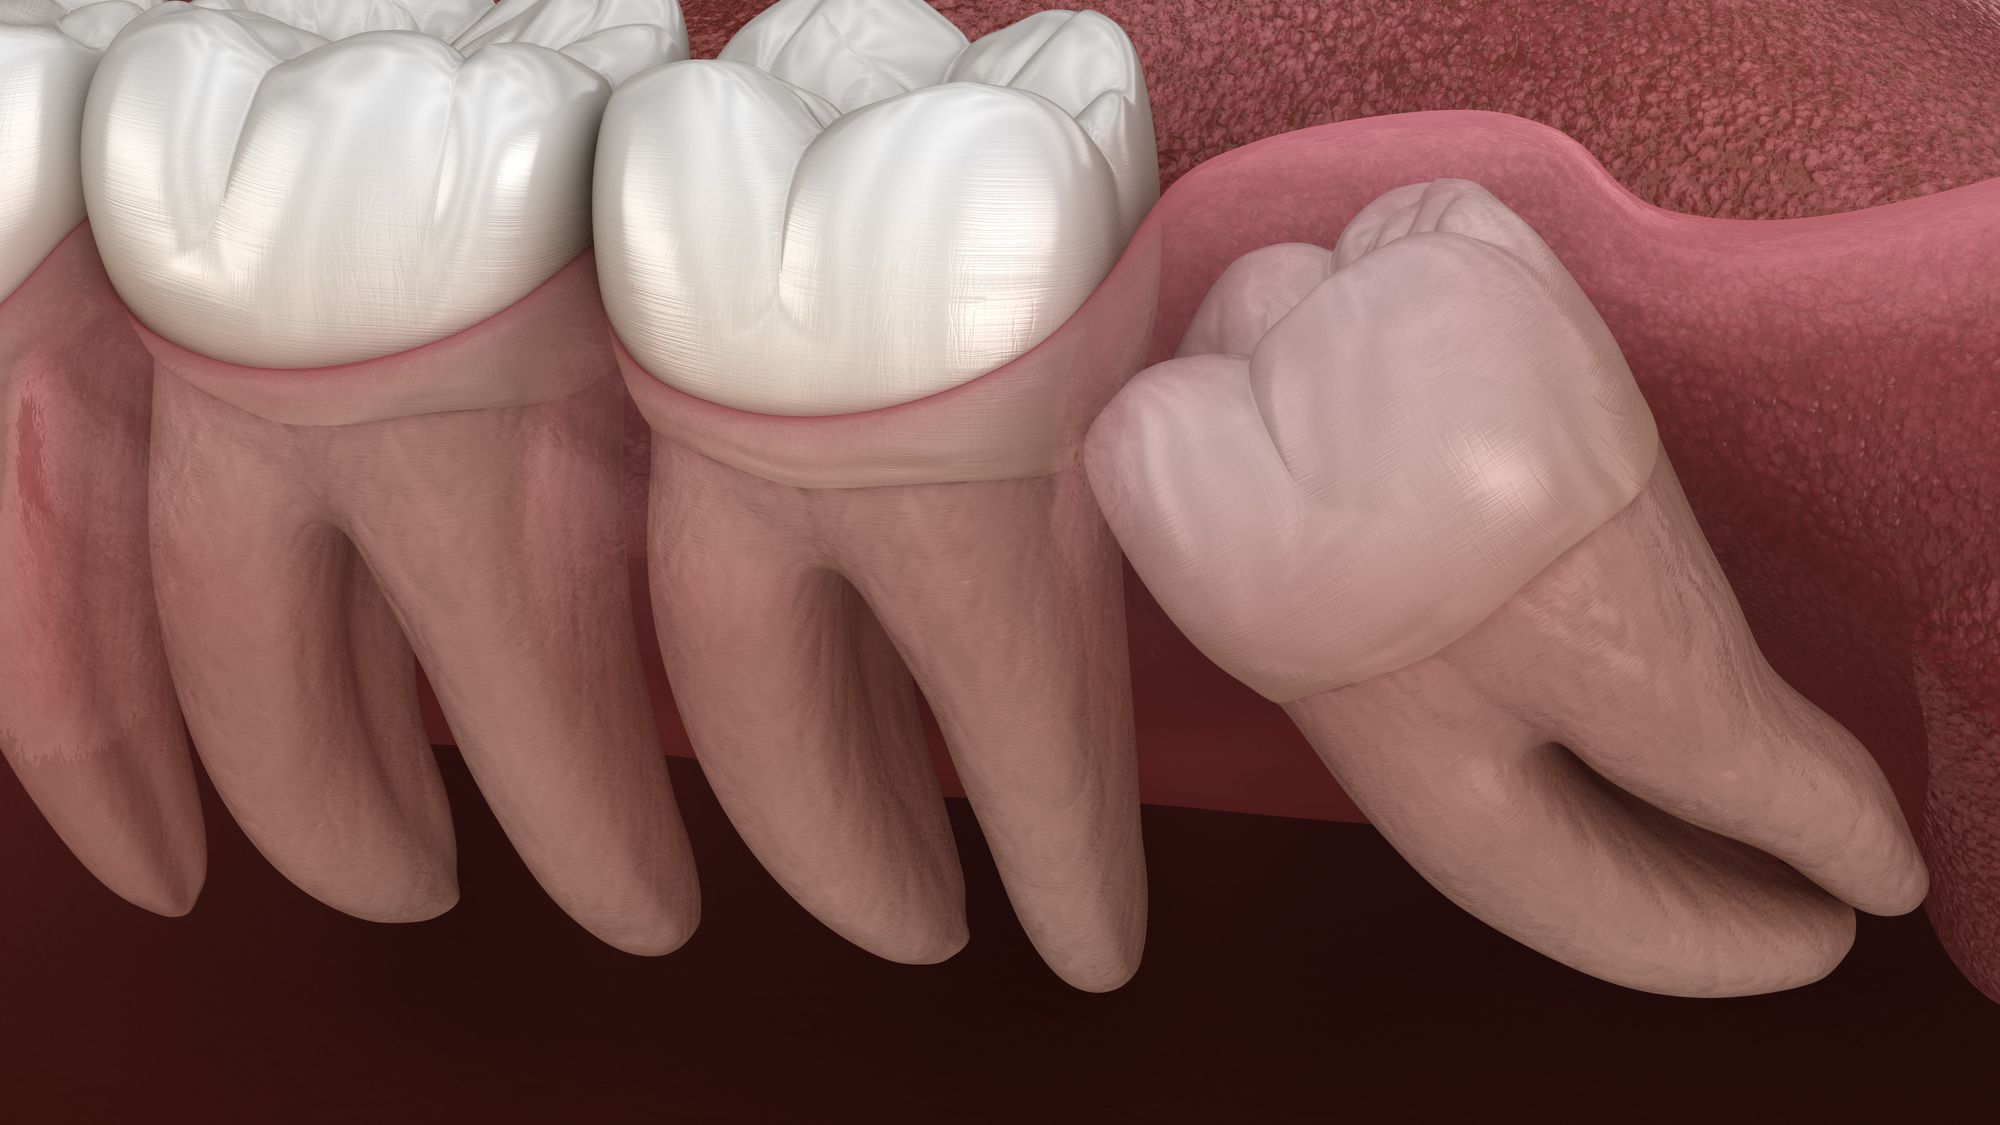 Symptoms and indicators of an impacted tooth